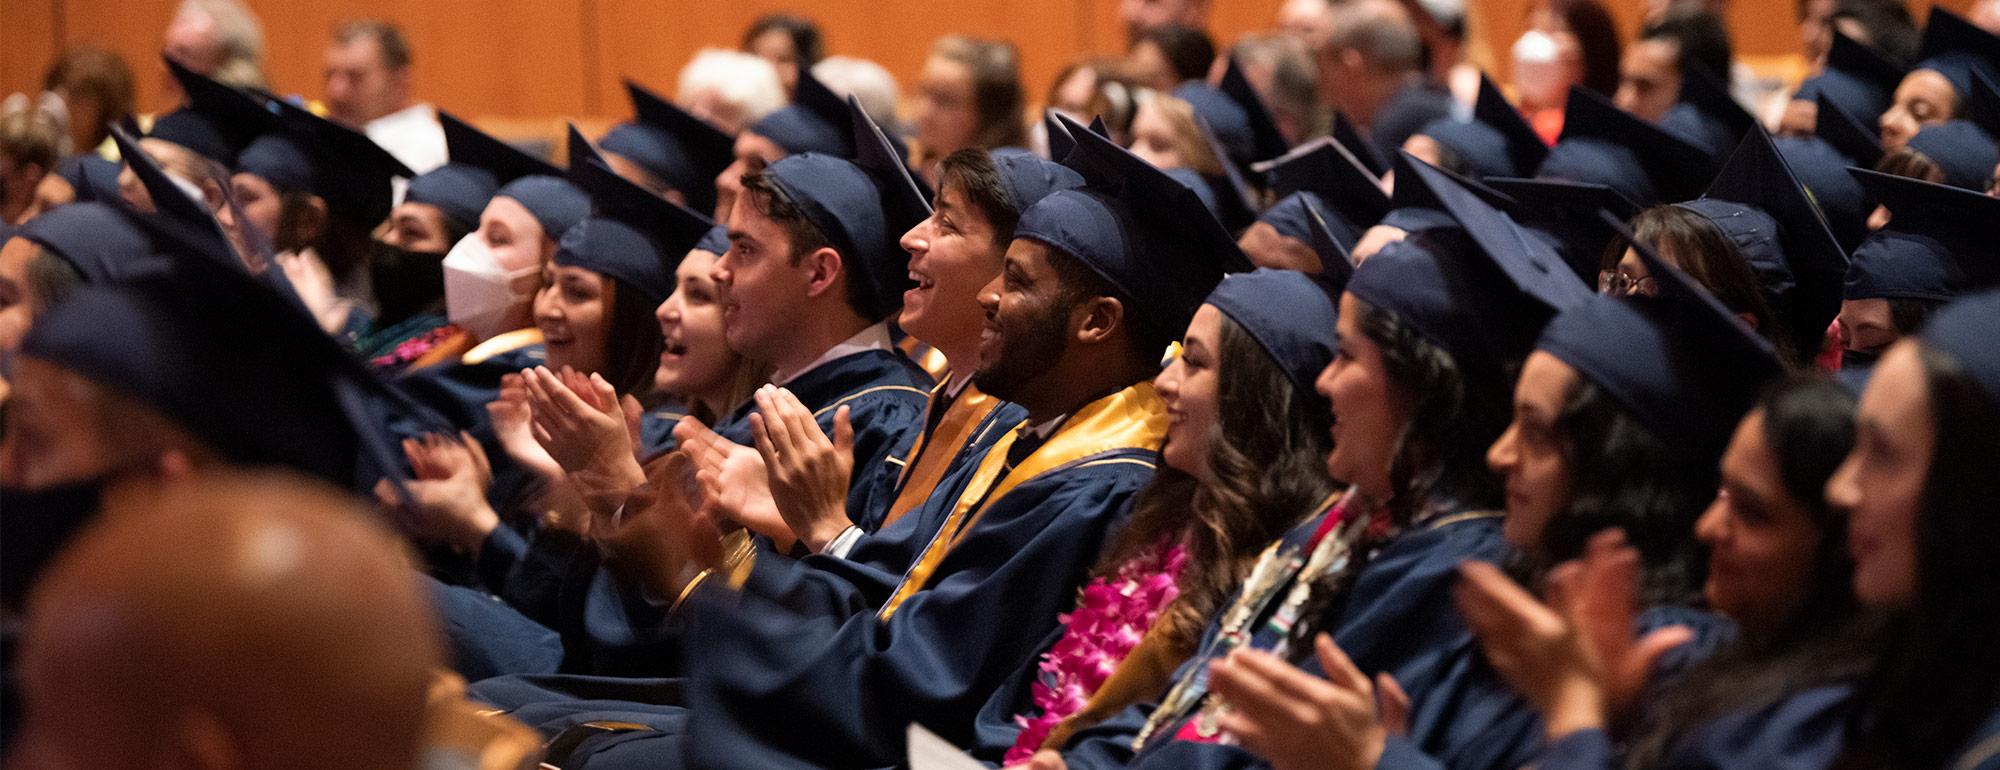 clapping and smiling students in caps and gowns in the Mondavi Center auditorium for a commencement ceremony